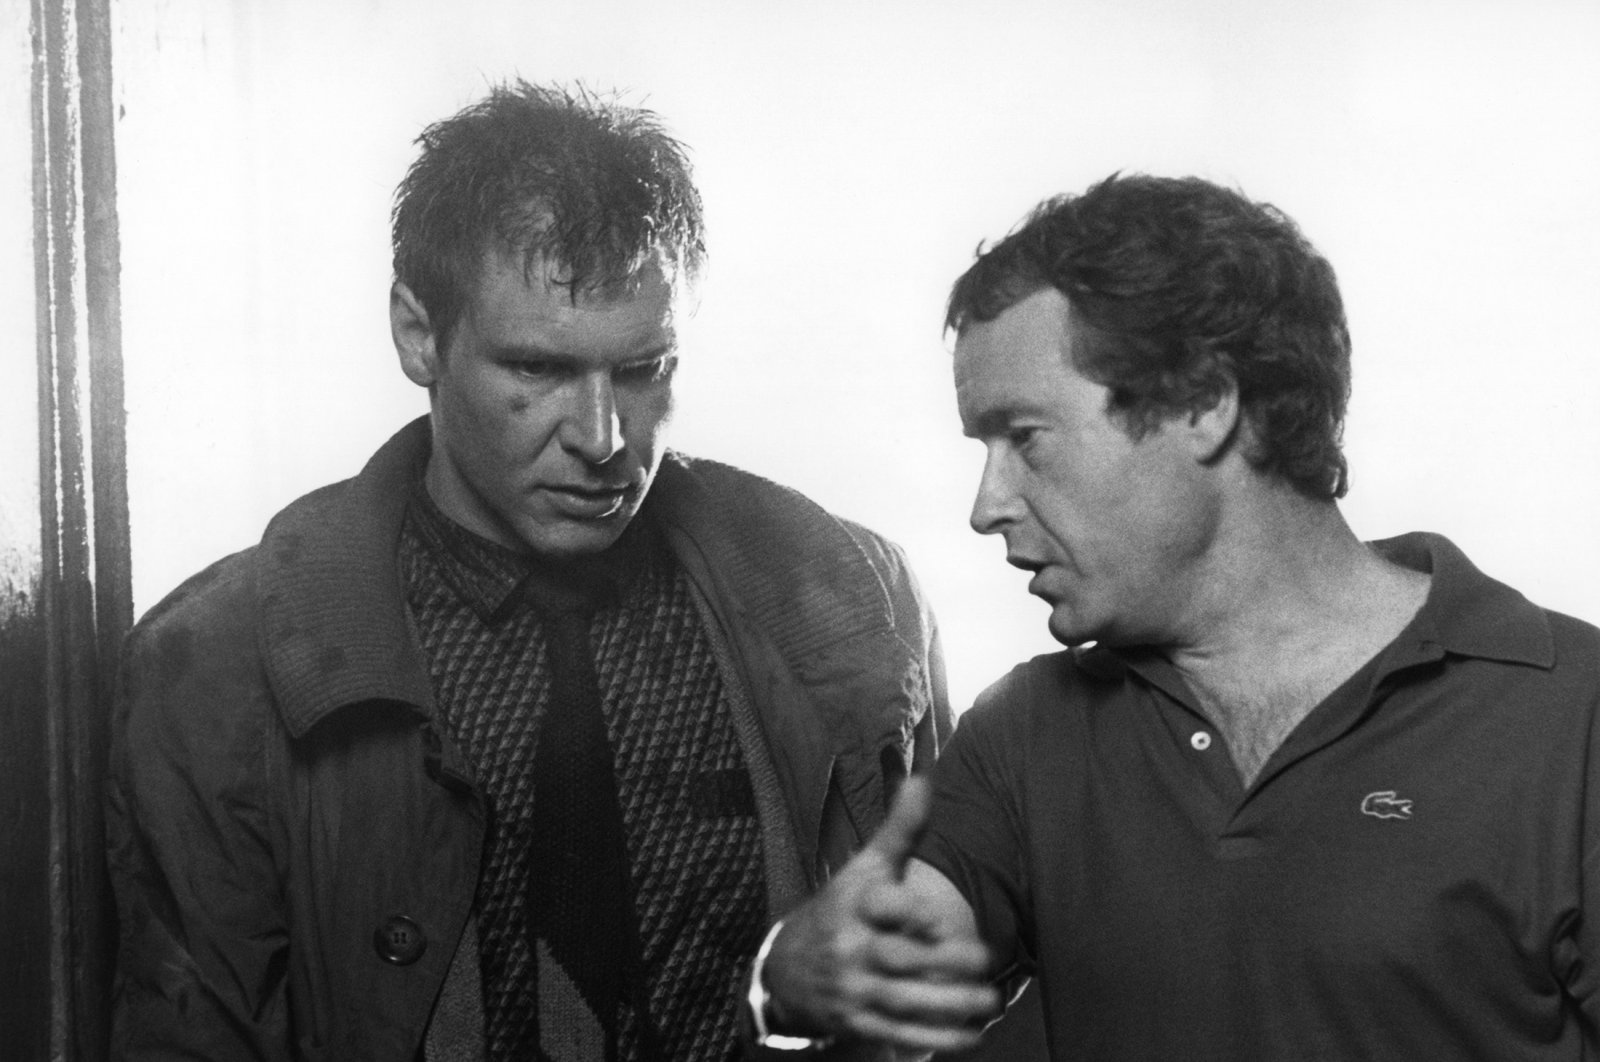 Harrison Ford (L) and Ridley Scott on the set of "Blade Runner", directed by Ridley Scott. (Corbis via Getty Images)